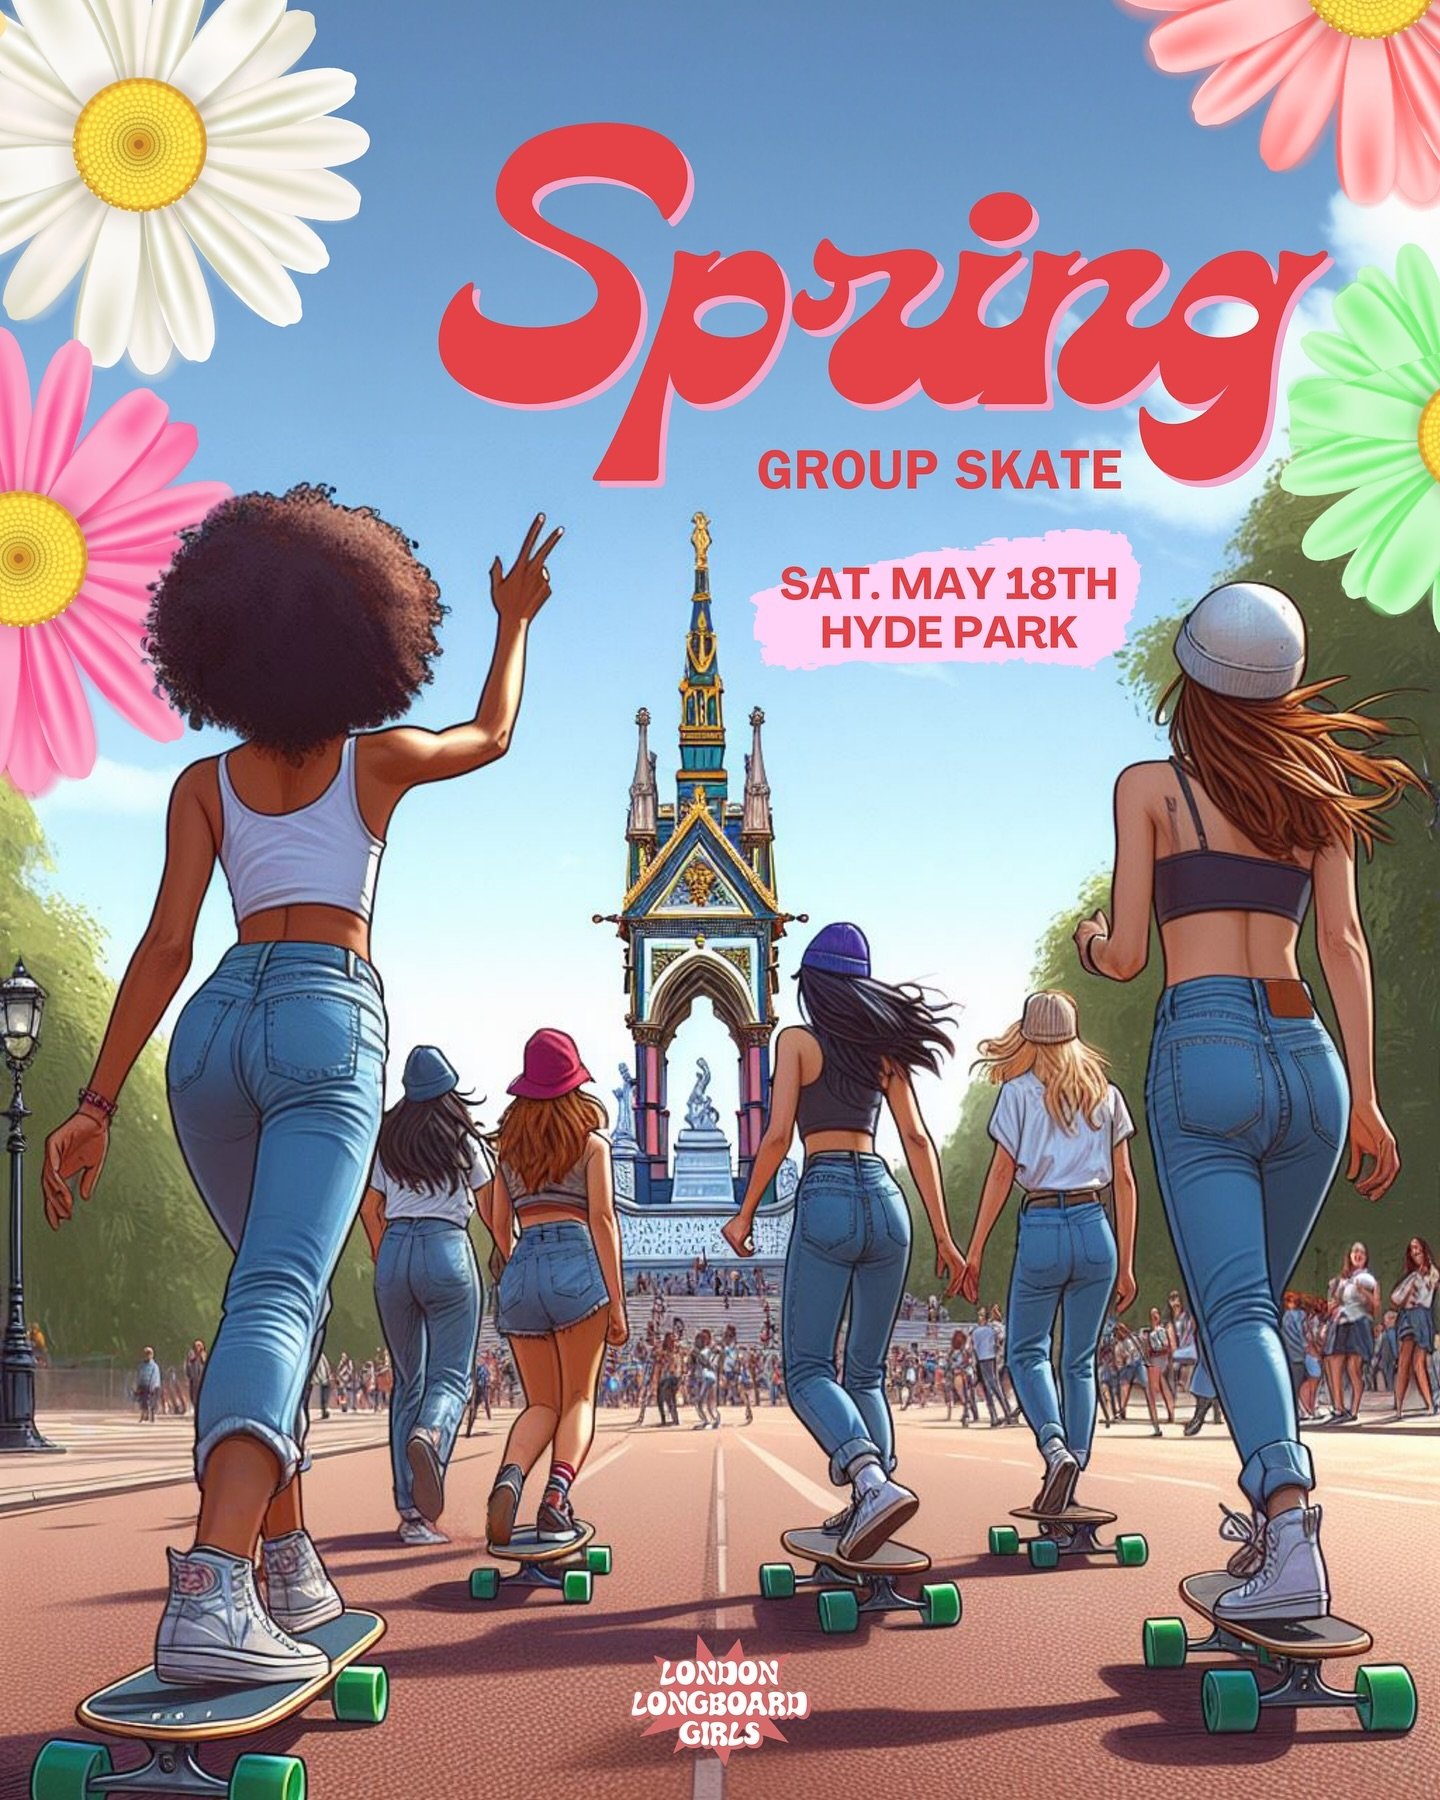 🌸🌞 Join our SPRING MEETUP &amp; GROUP SKATE on May 18th 🌷🌼

🌼 All levels welcome (and celebrated)! If you are a beginner, it&rsquo;s a great place to come and practice your skills in a safe environment.
🌼 Come join a friendly community of women